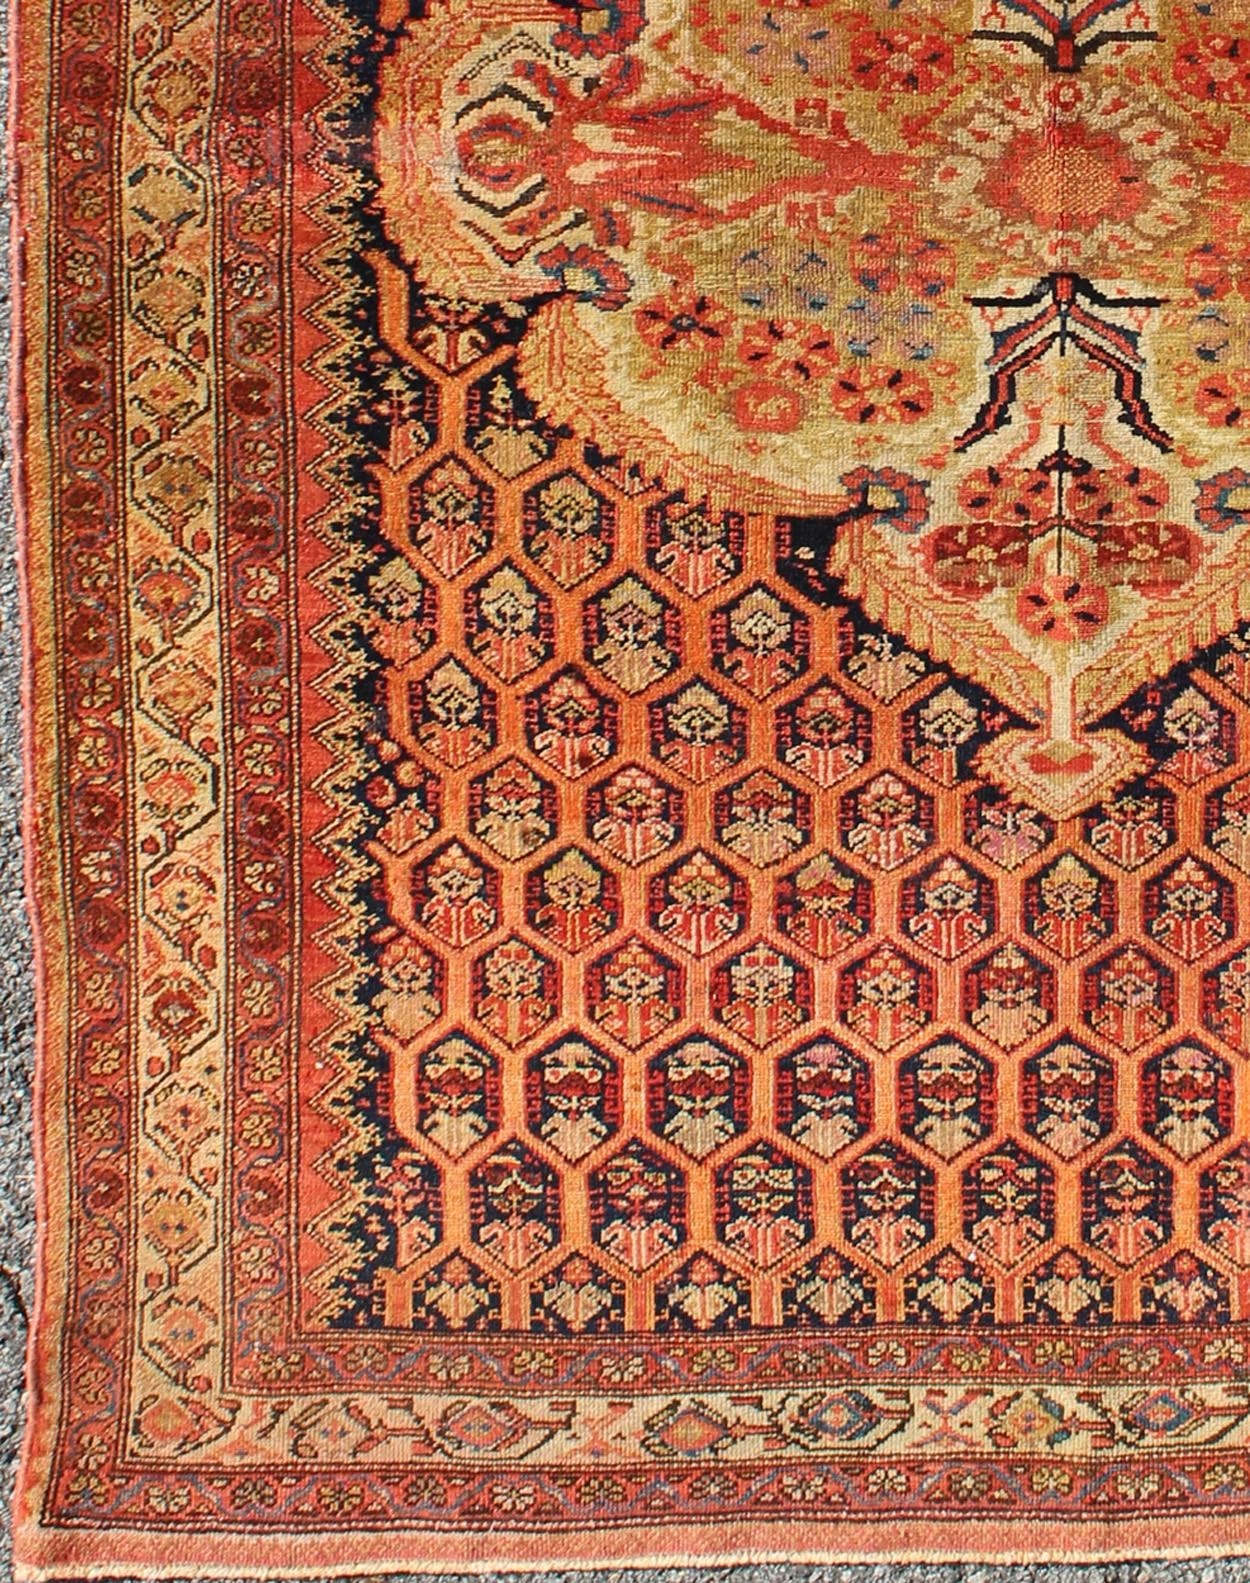 Antique Mission Malayer Rug with Floral Medallion in Blue, Orange & Green.
This amazing, antique mission Malayer rug was handwoven around the second half of the 19th Century and bears a remarkably unique medallion and all-over design. The